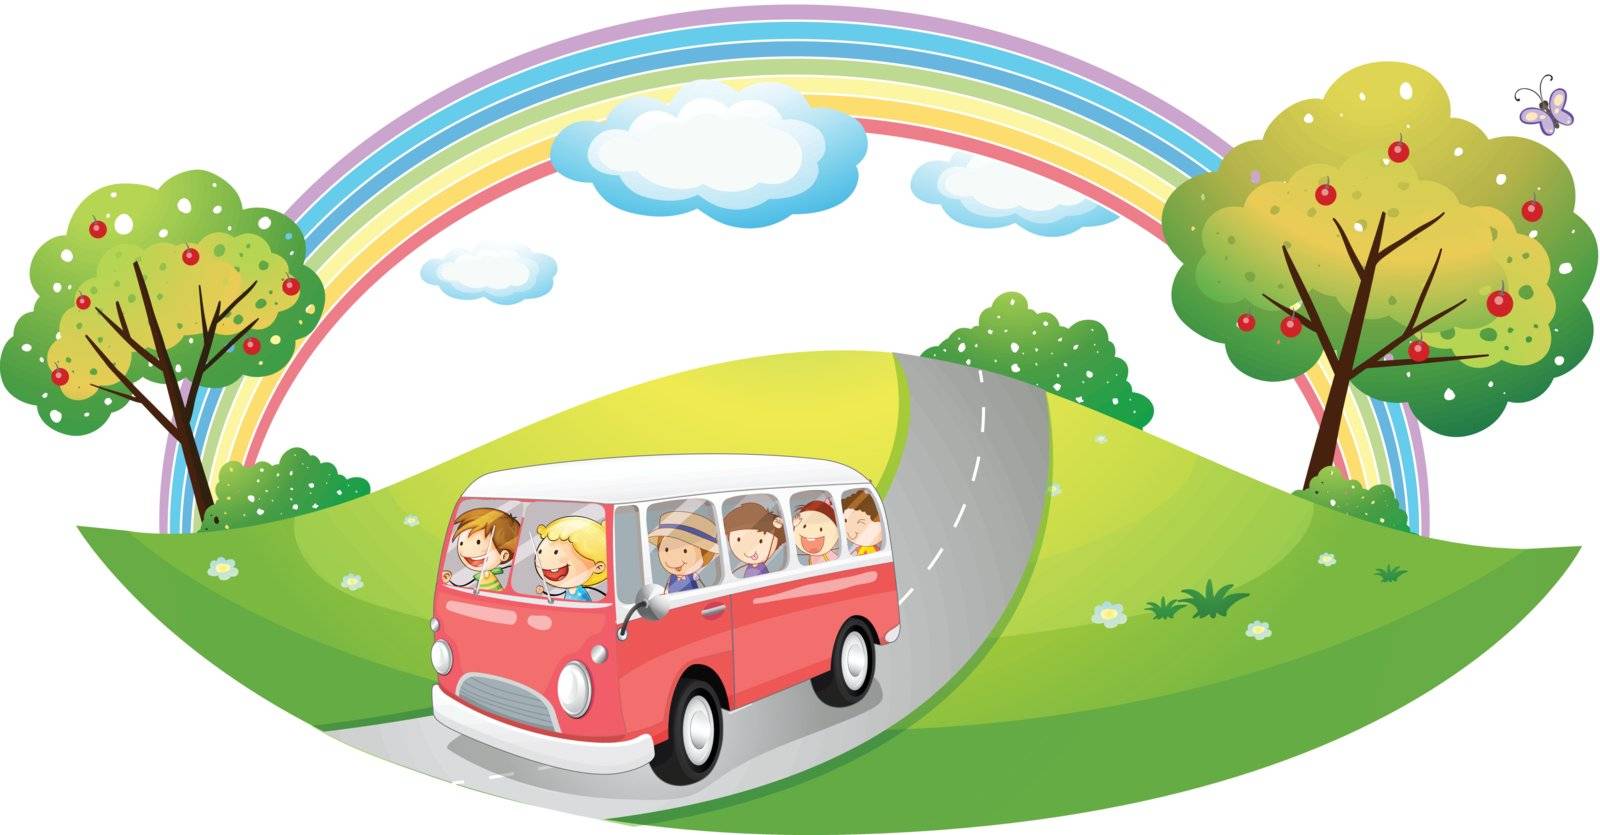 Illustration of a pink bus with passengers on a white background